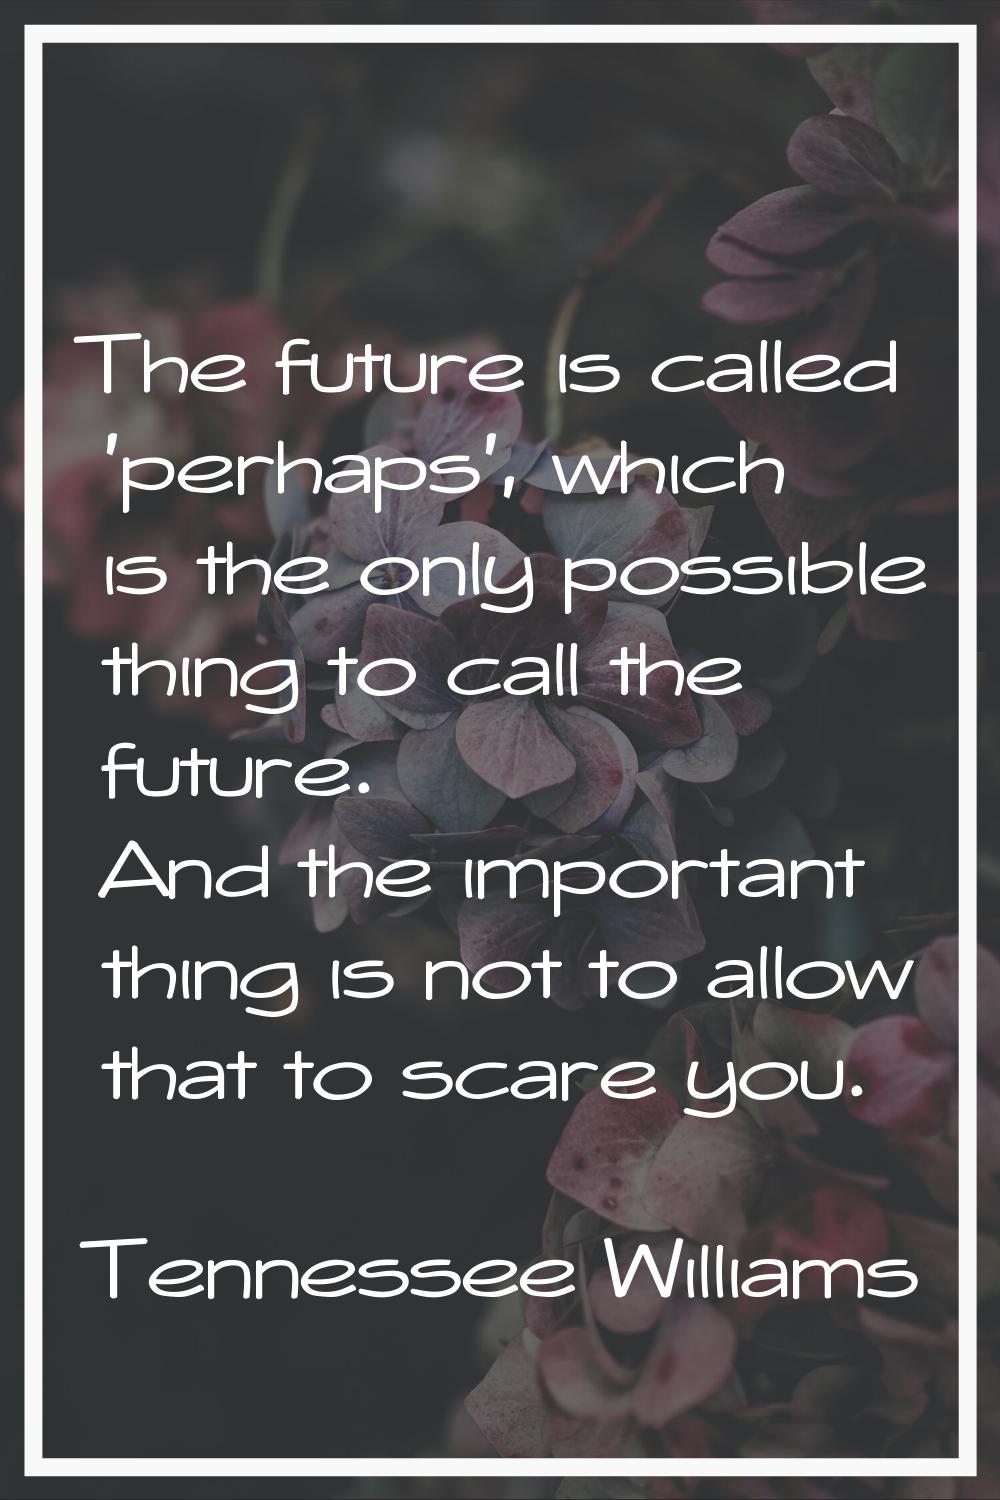 The future is called 'perhaps', which is the only possible thing to call the future. And the import